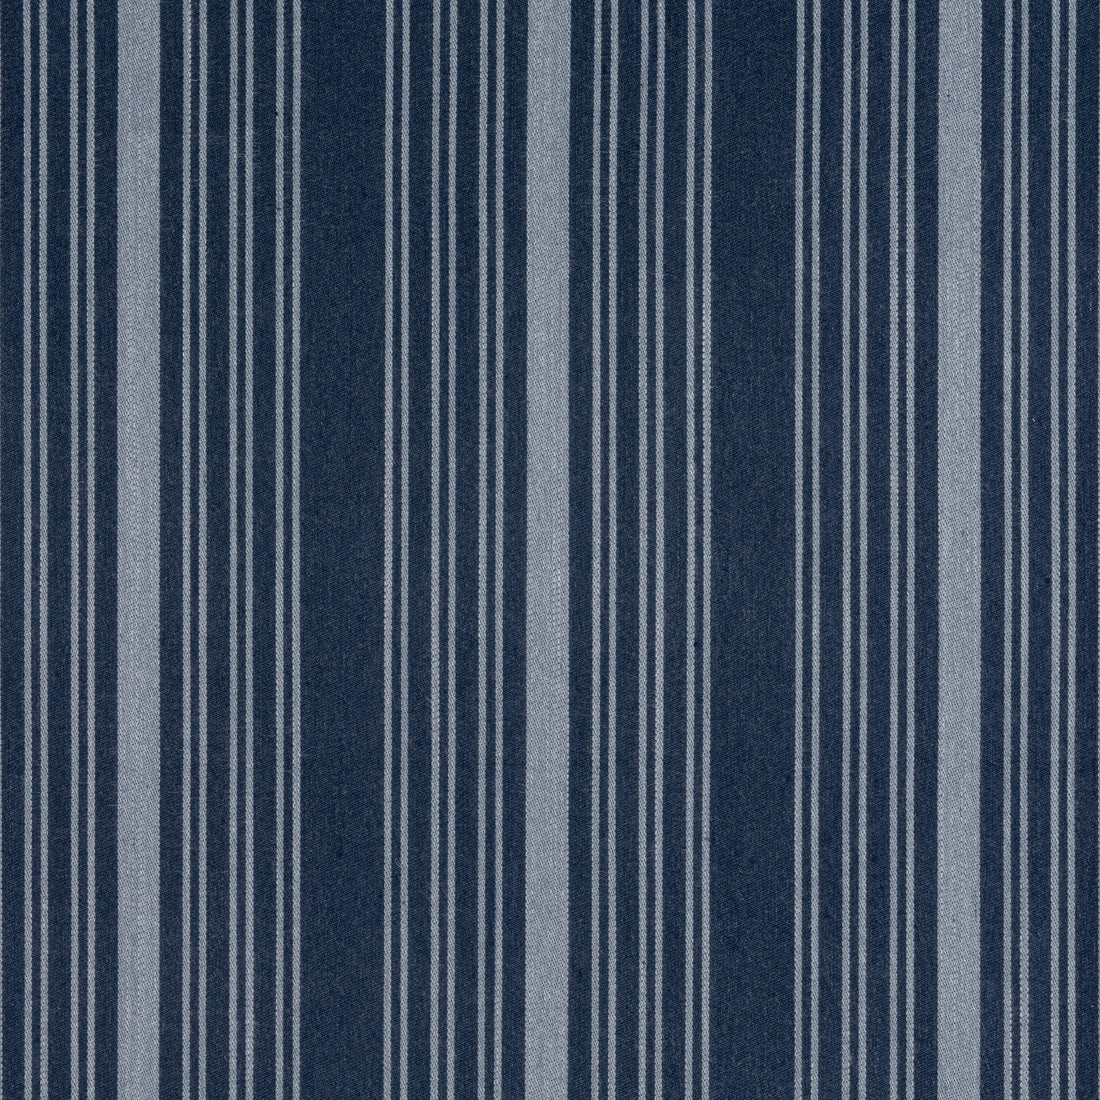 Kaia Stripe fabric in marine color - pattern number W8539 - by Thibaut in the Villa collection